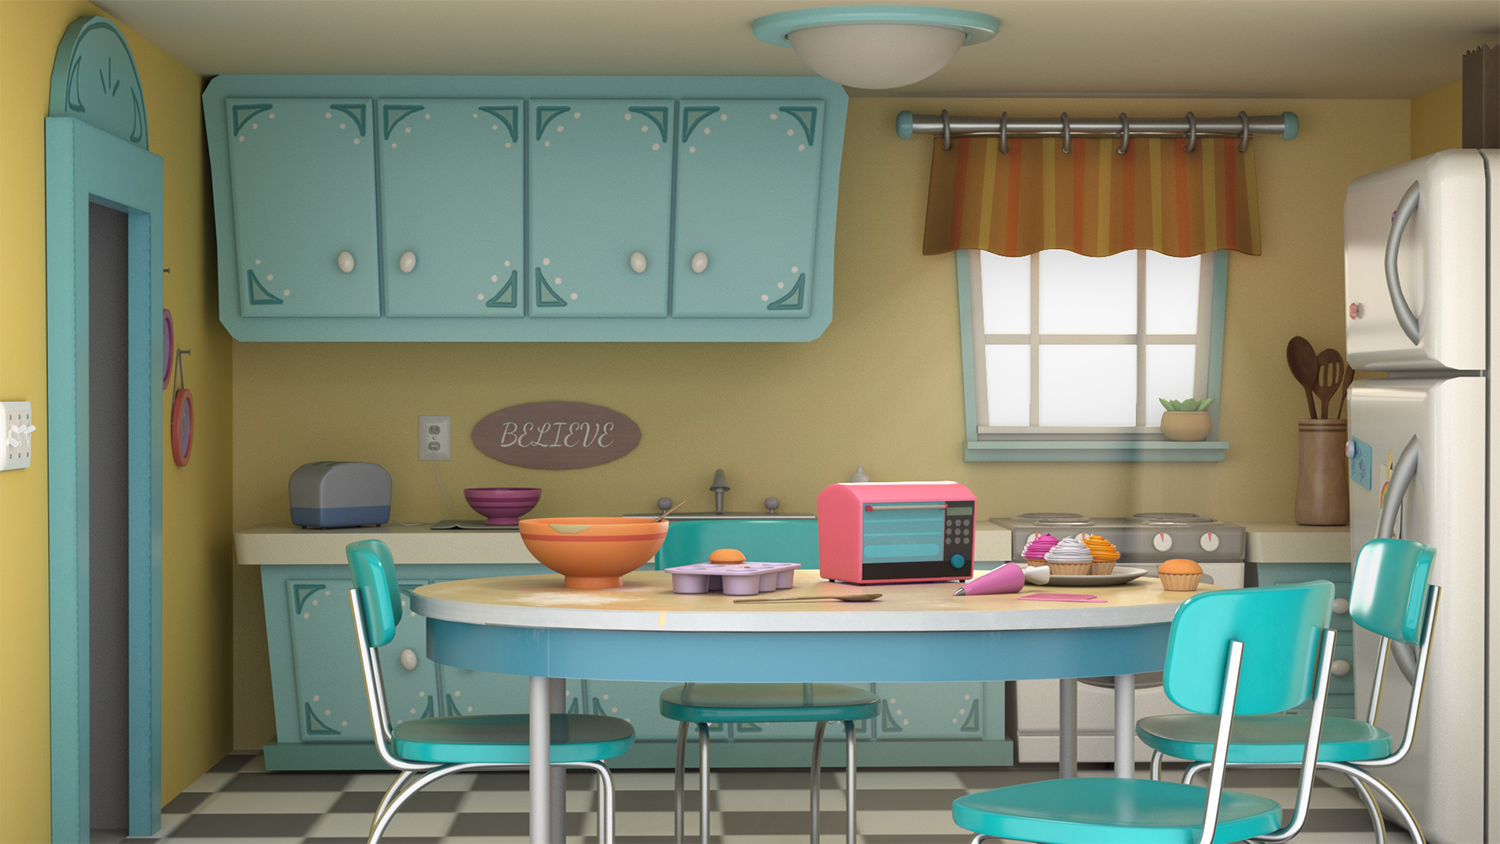 A 3D design of a kitchen with bright, saturated colors.